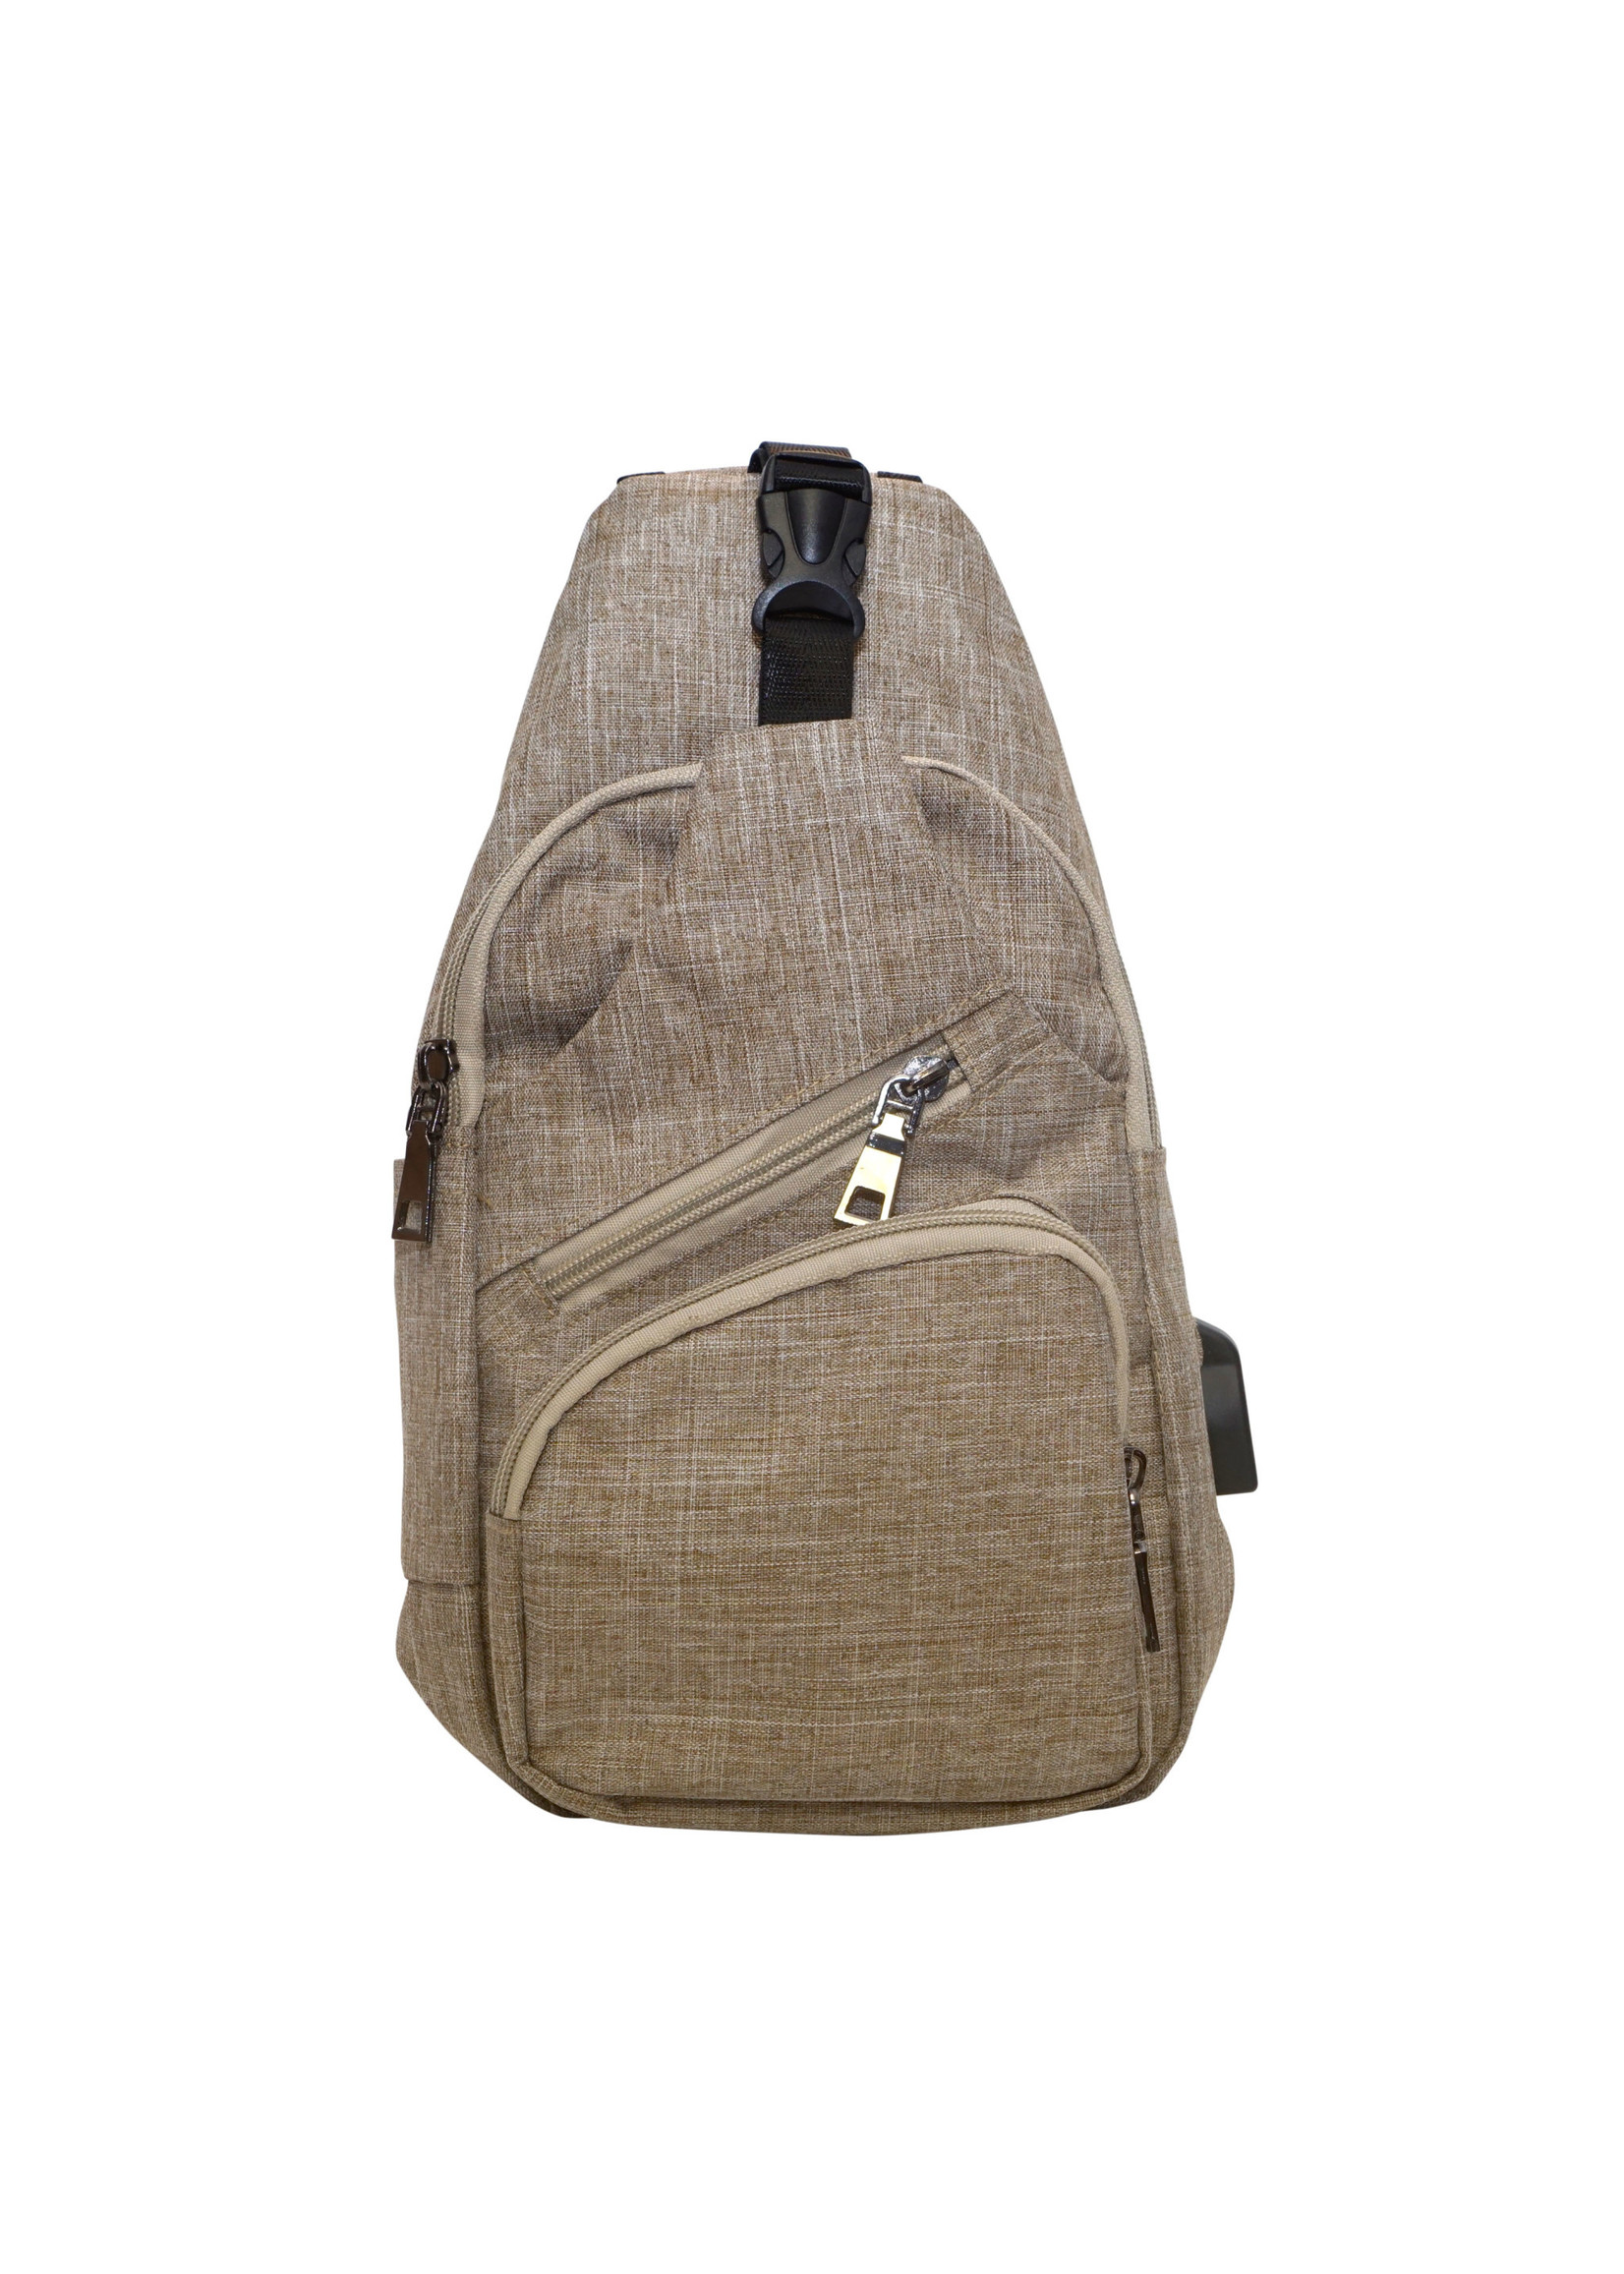 NU pouch anti-theft sling backpack